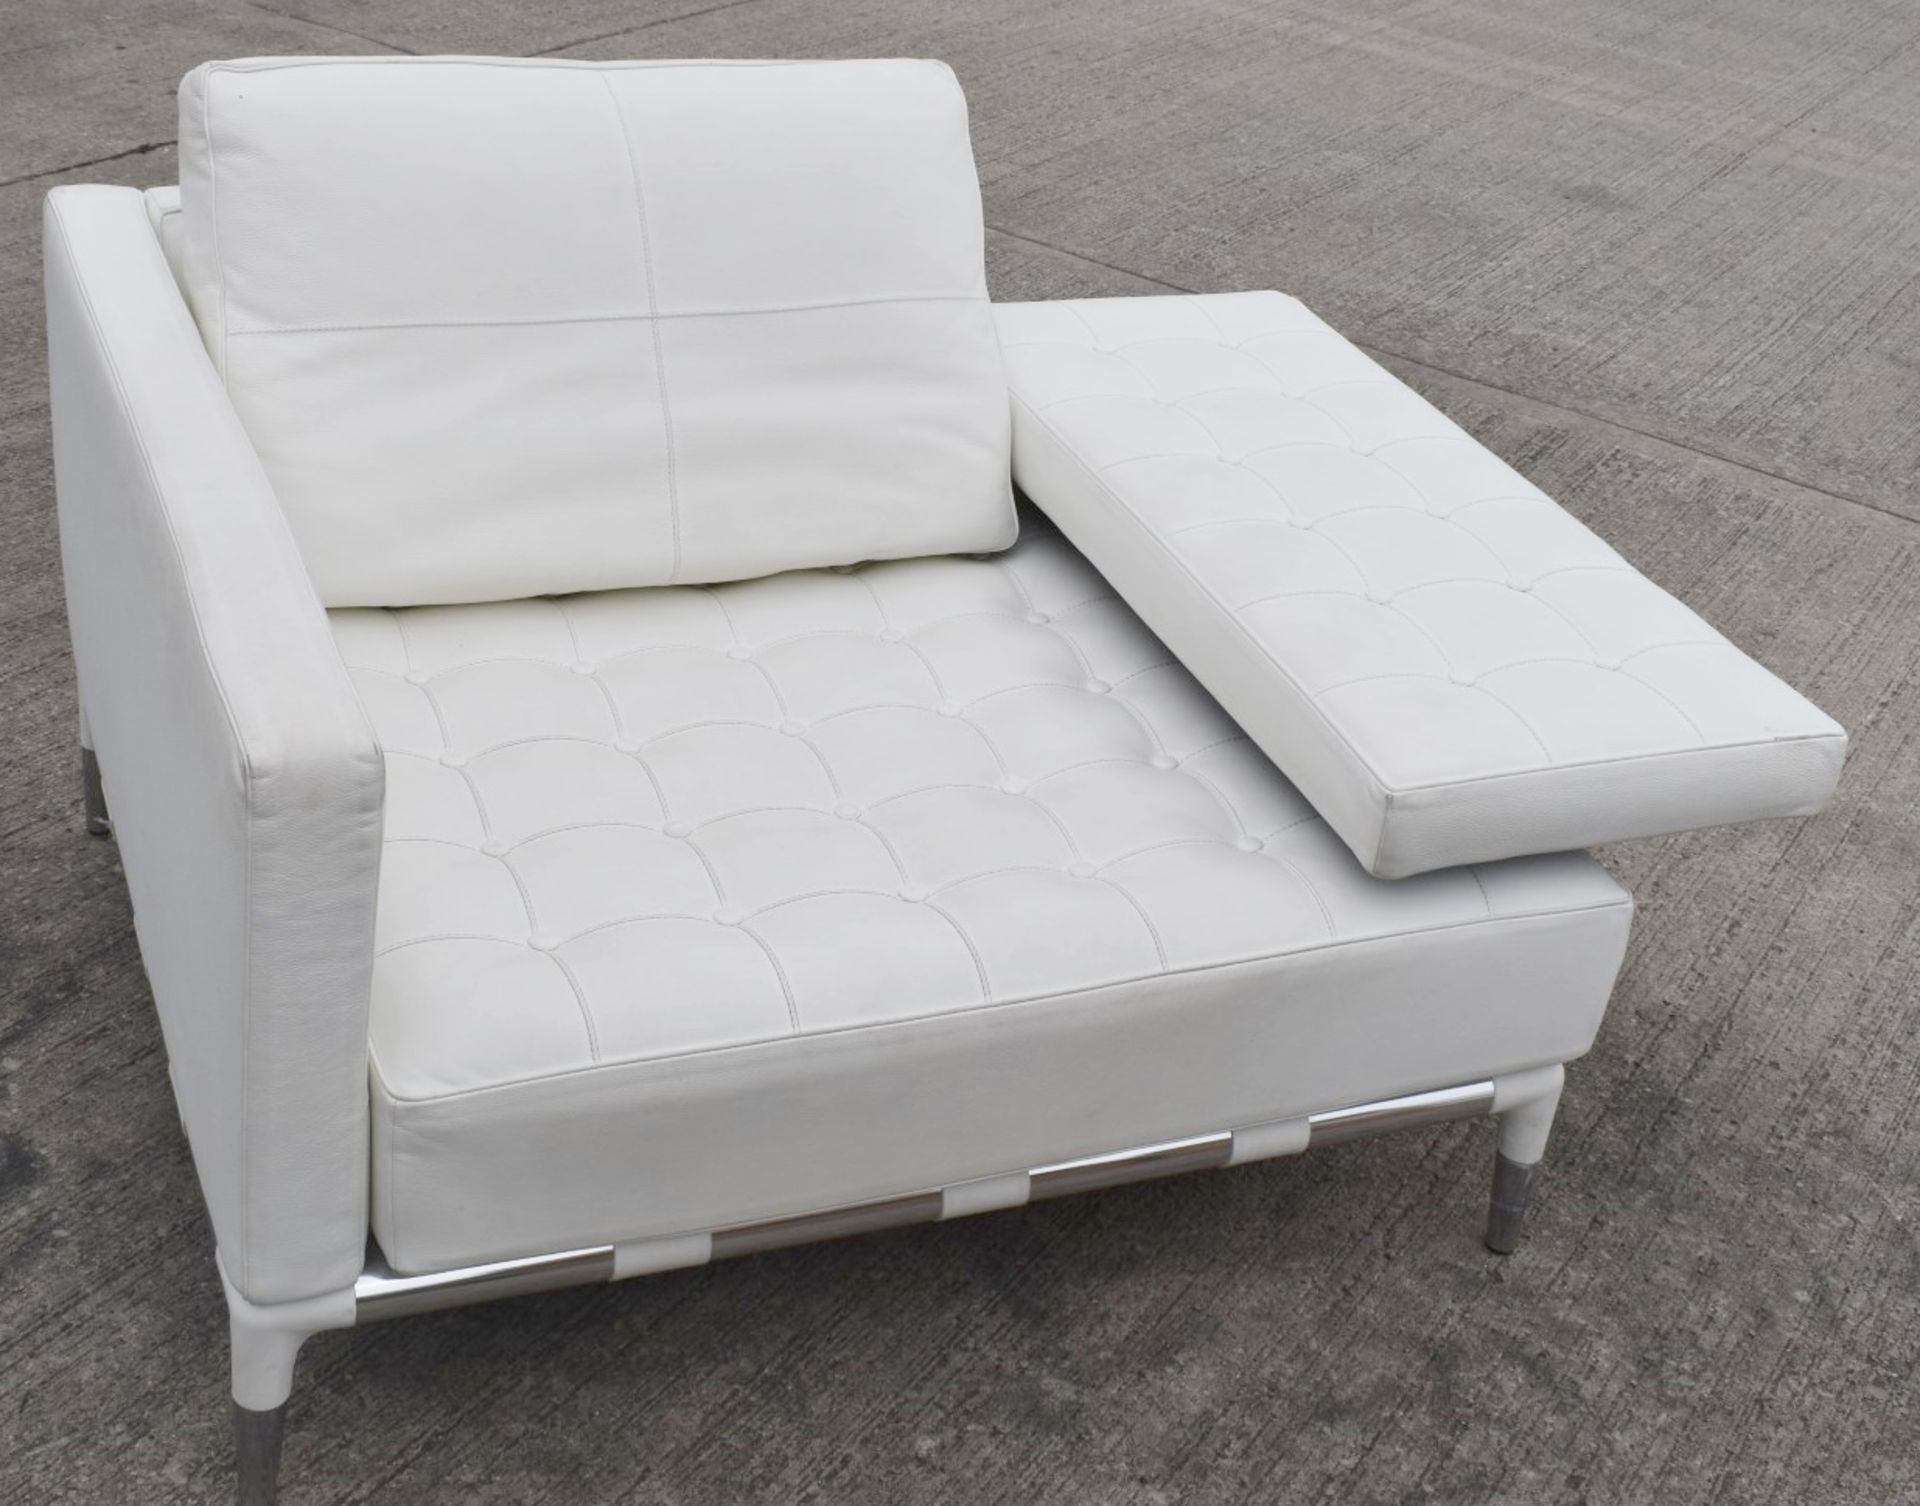 Pair Of CASSINA PRIVÉ / PHILIPPE STARCK Style Designer White Leather Lounge Chairs - Original Price - Image 9 of 10